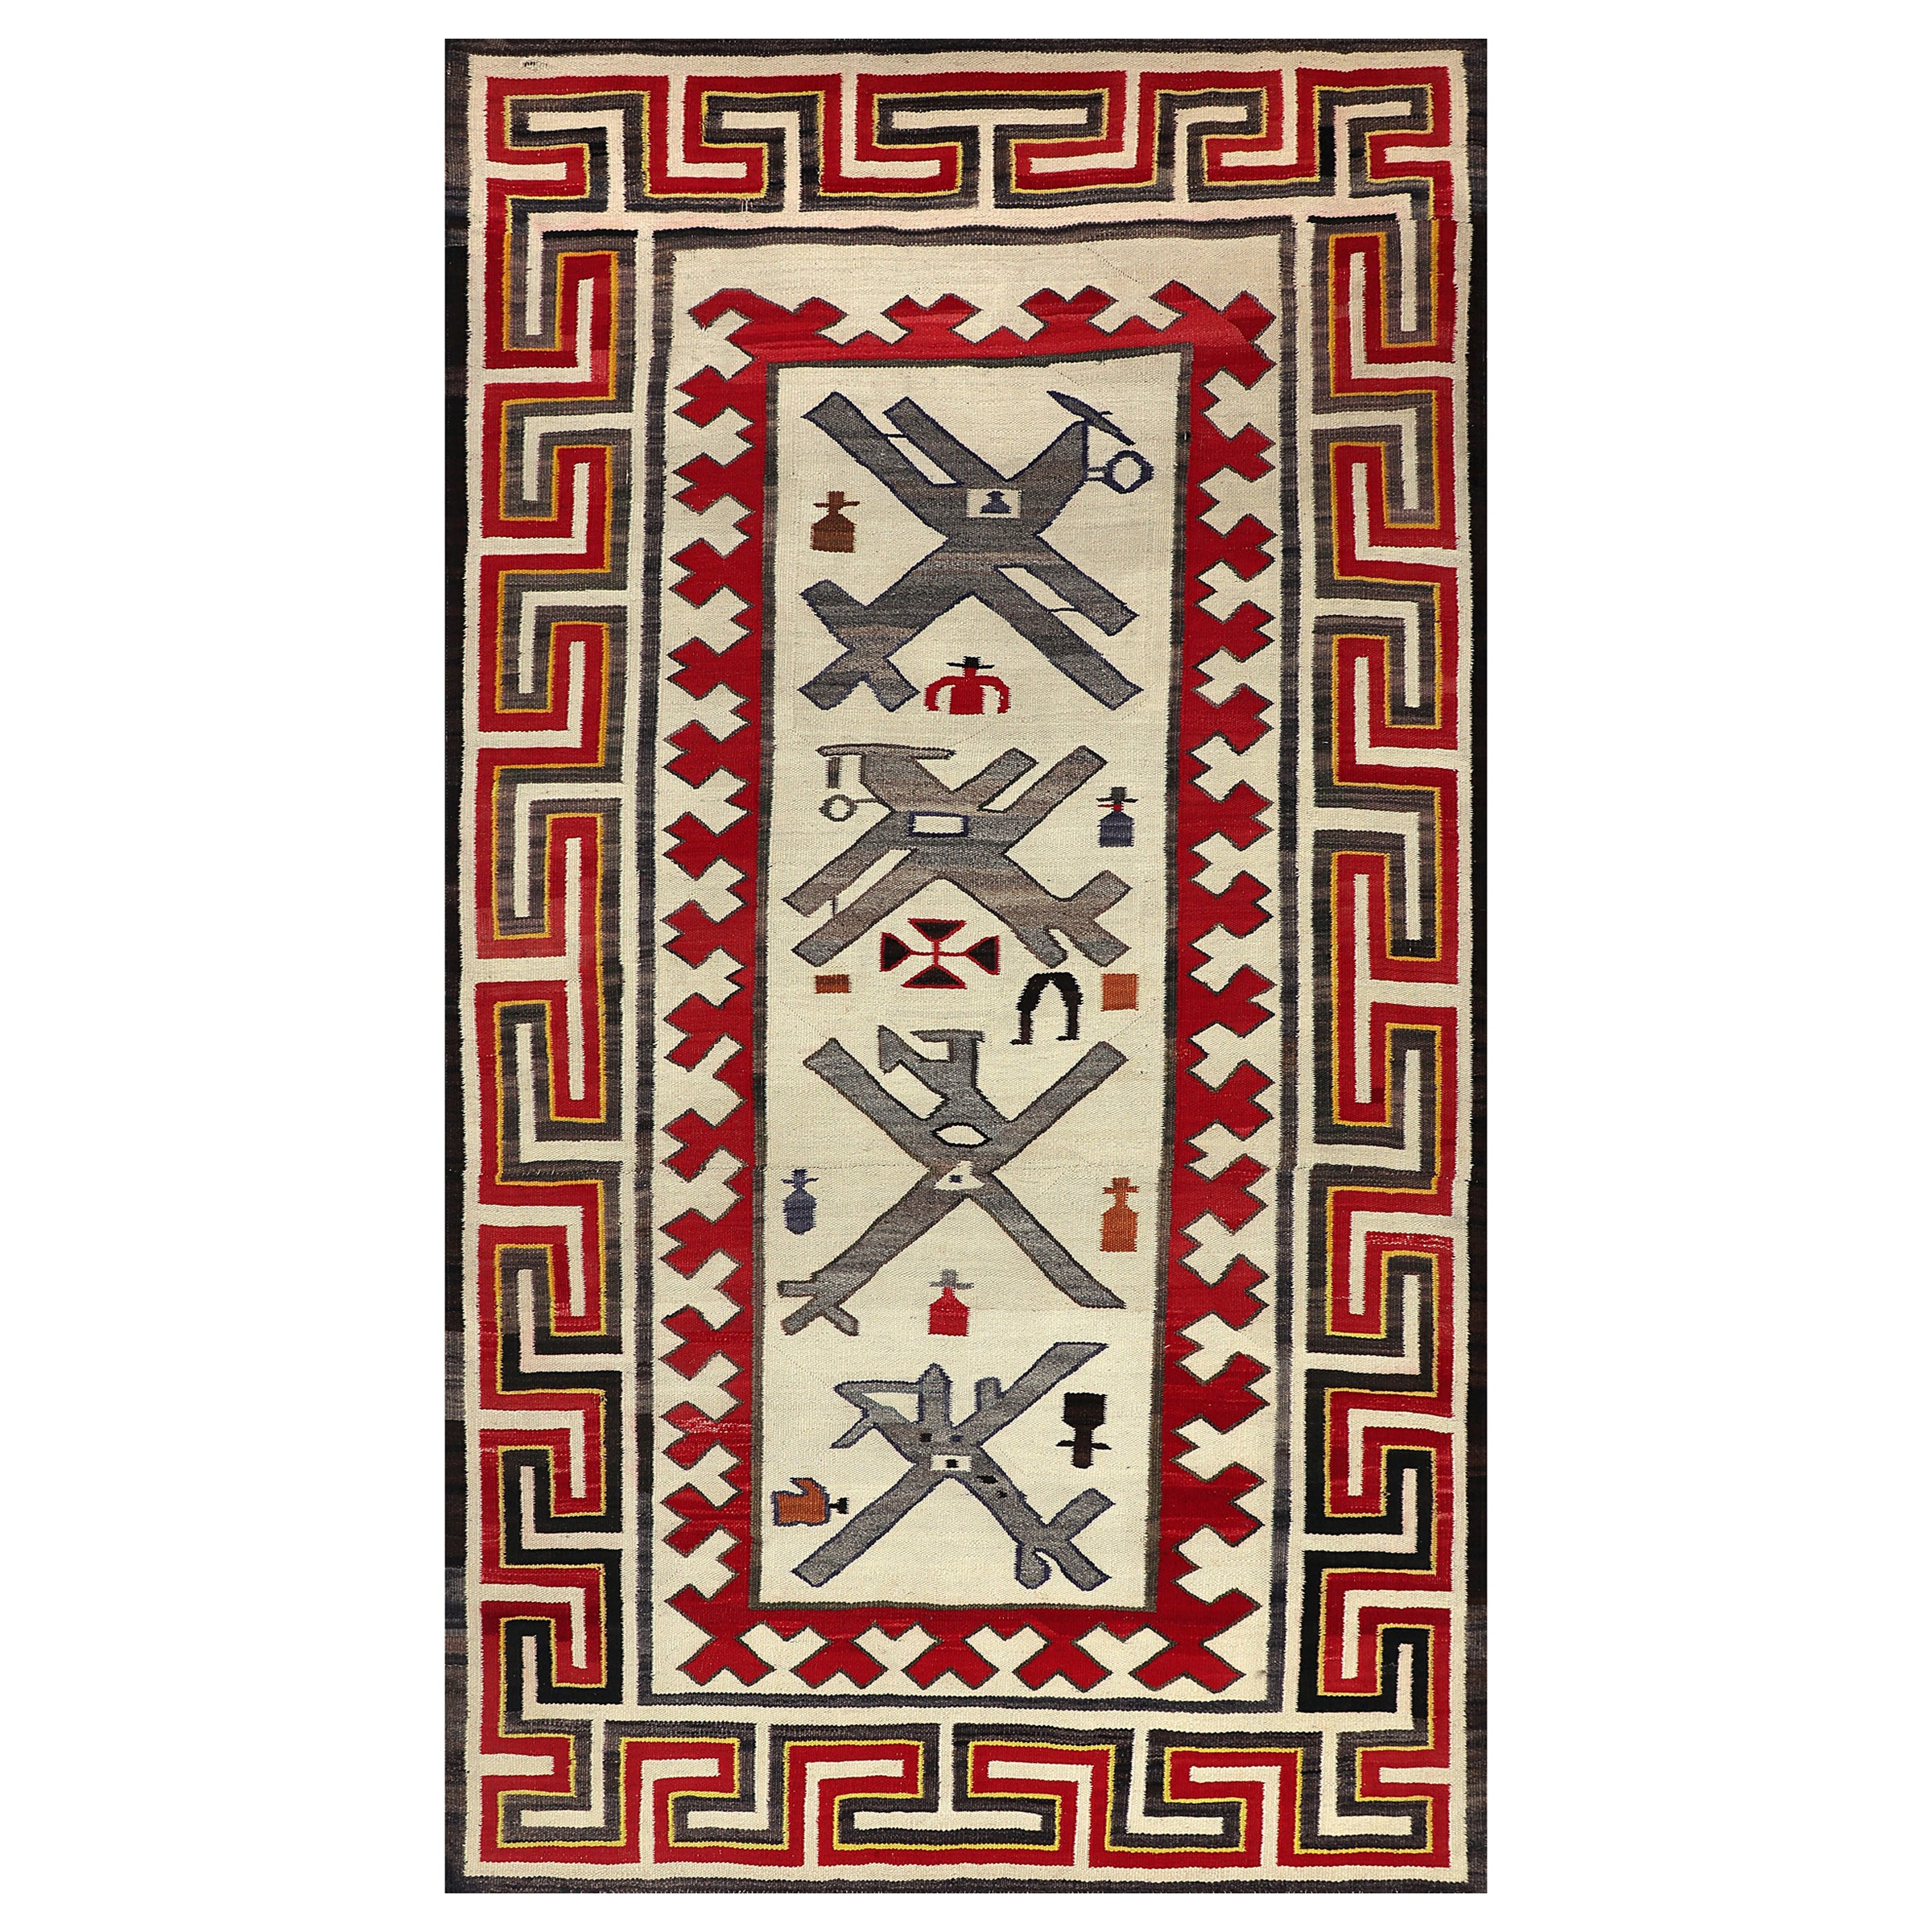 Vintage Navajo Rug, Pictorial Weaving, Airplane Design in Red, Gray, Ivory For Sale